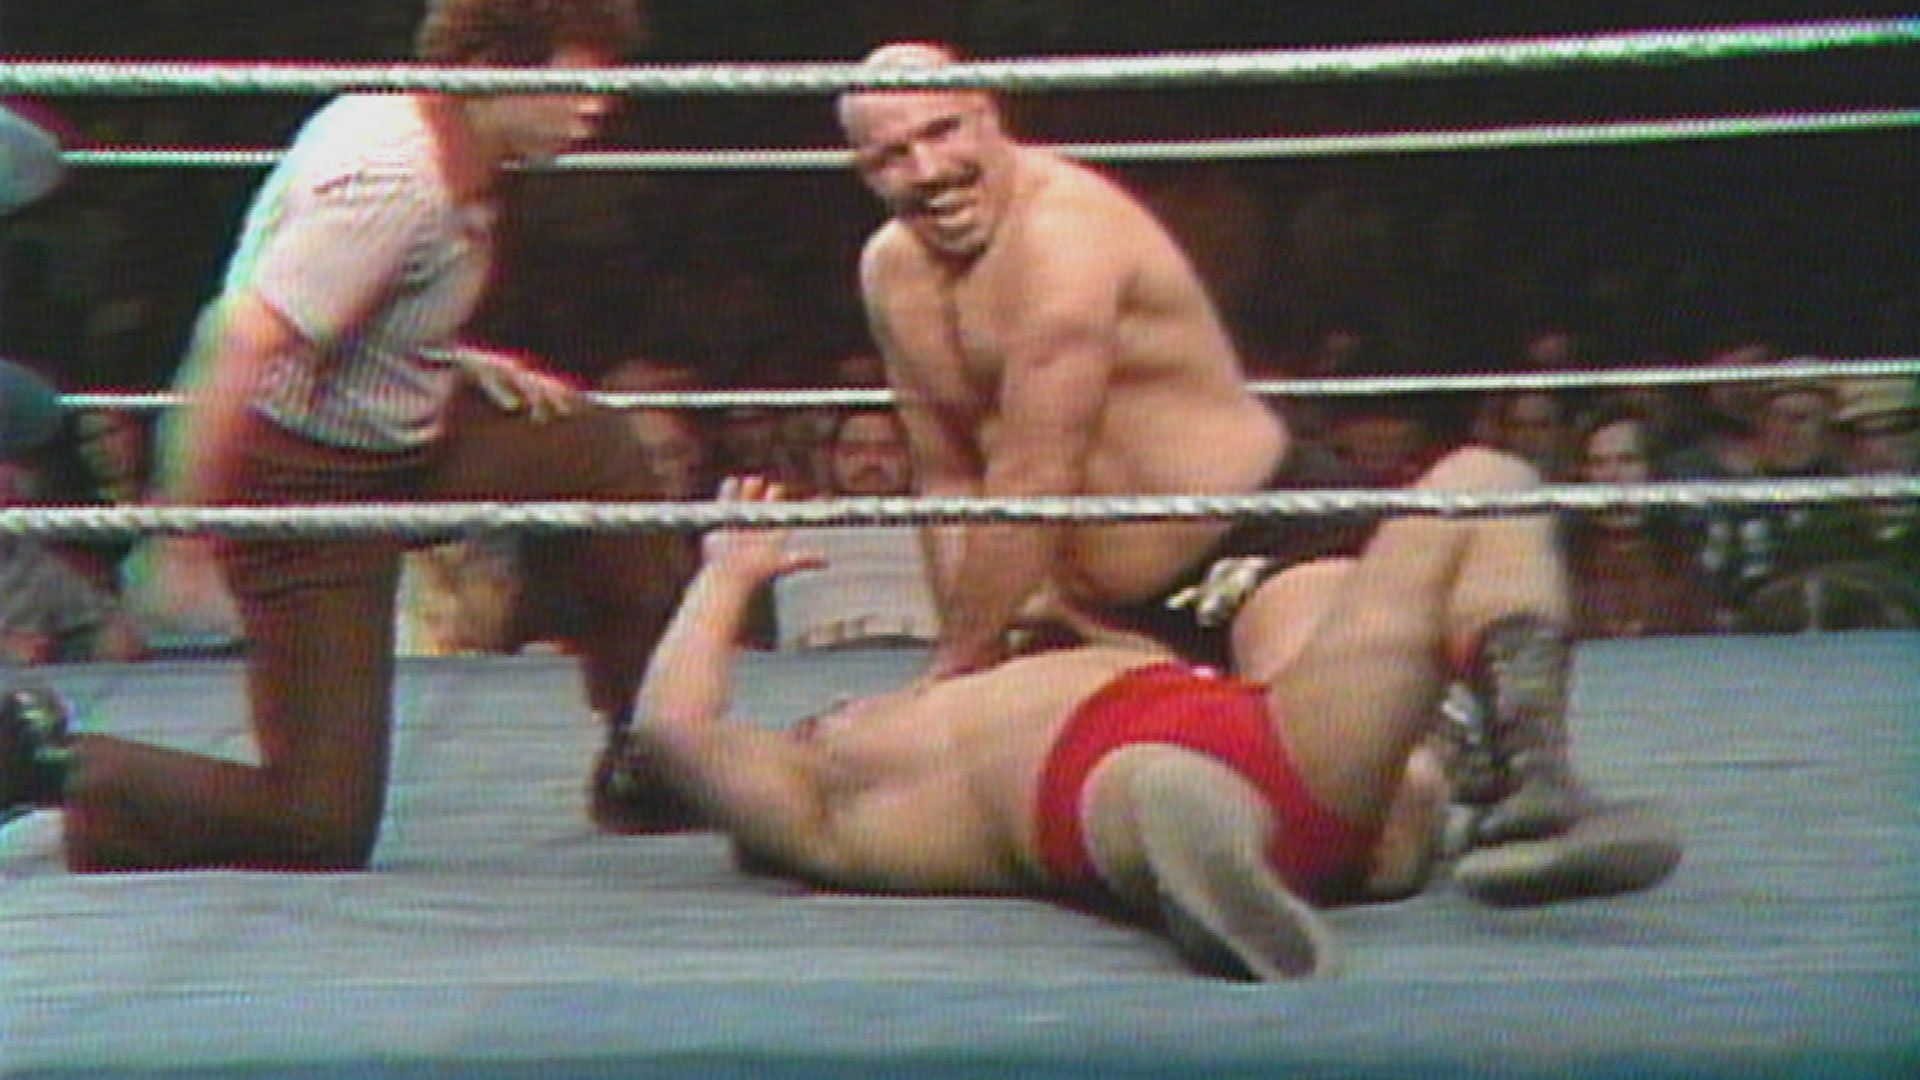 Sheik puts one of his opponents in a submission